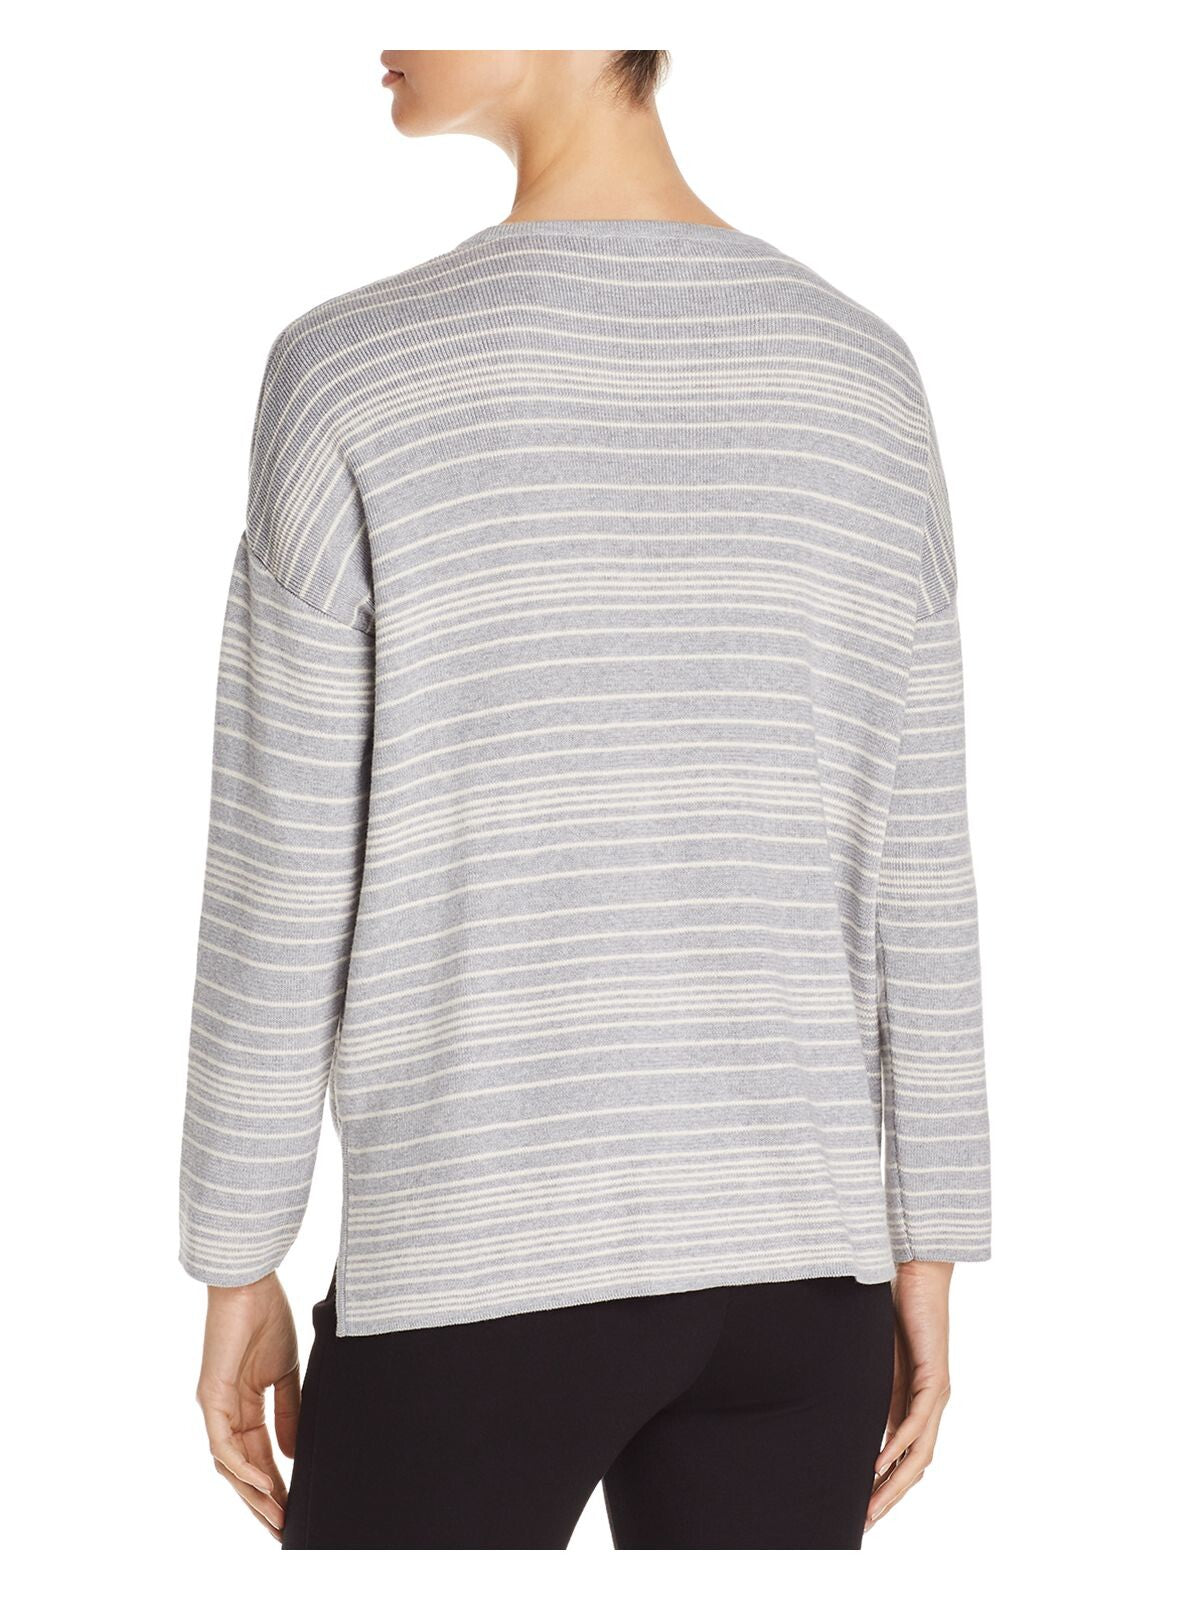 EILEEN FISHER Womens Gray Ribbed Vented Hem Striped Long Sleeve Jewel Neck Sweater Plus 2X